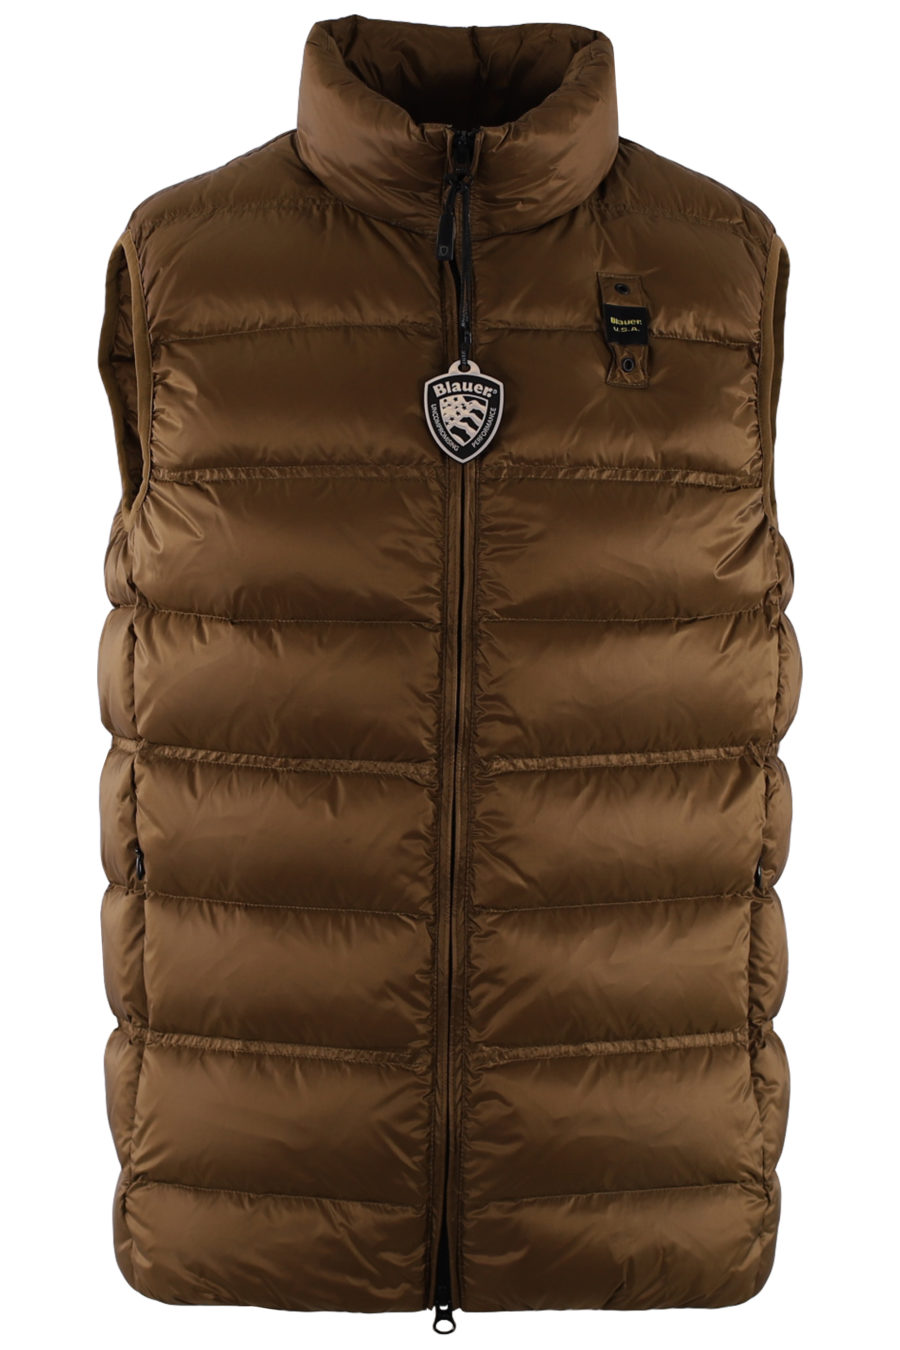 Brown quilted waistcoat - IMG 9416